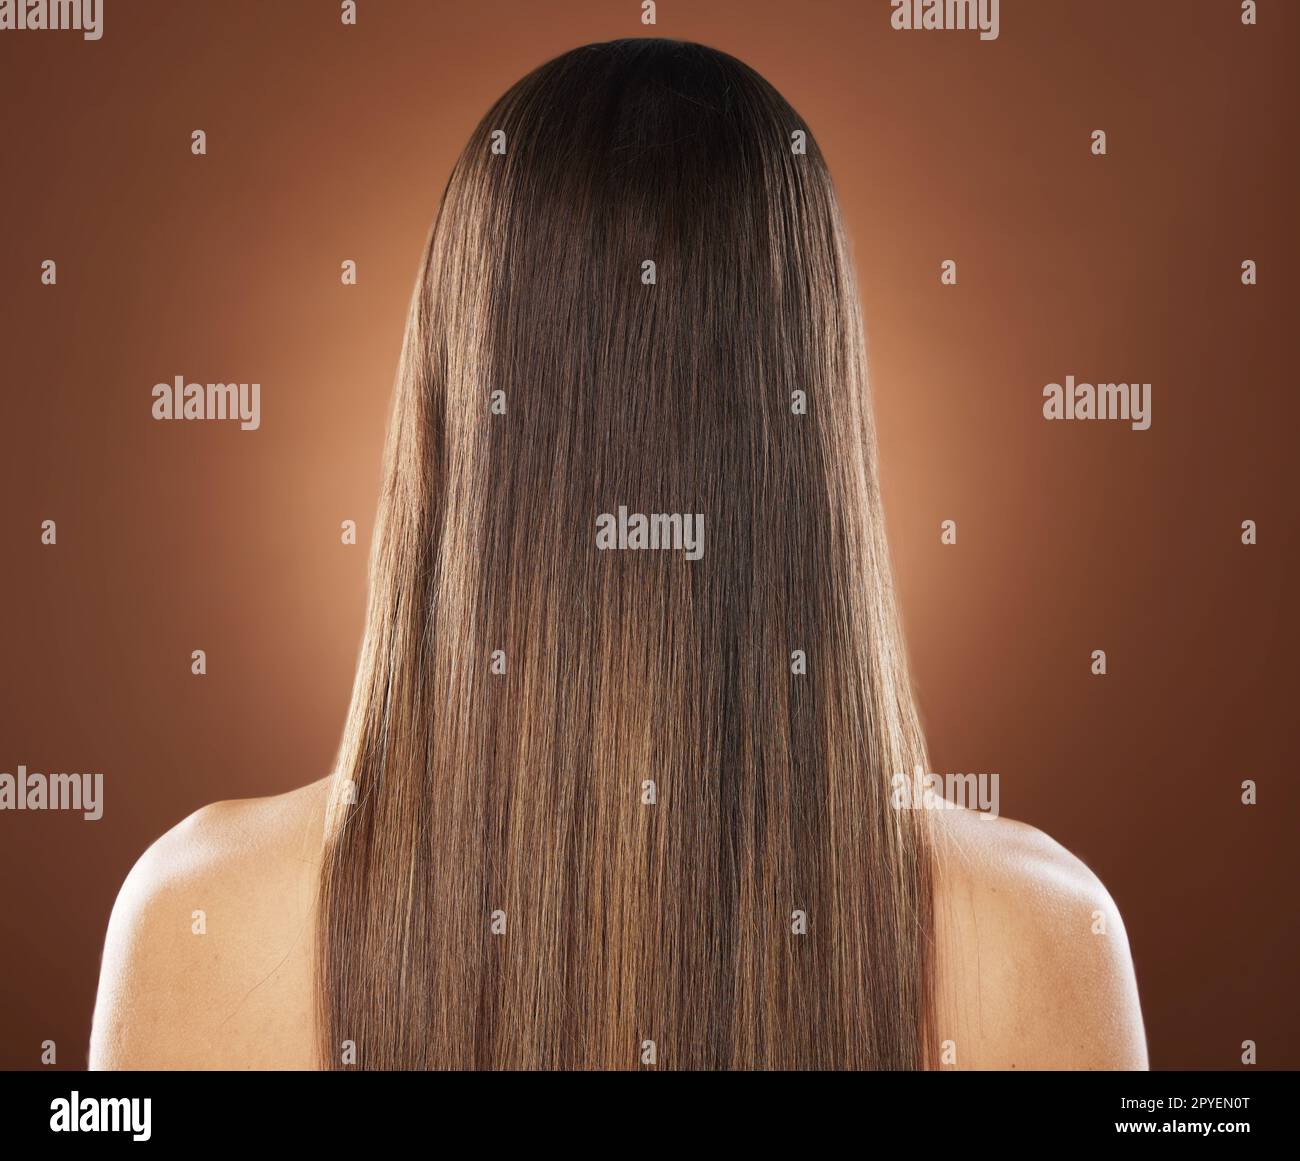 Woman, back or hair style on brown background in relax studio for keratin treatment, self care wellness or color dye routine. Model, texture or brunette growth aesthetic with balayage transformation Stock Photo